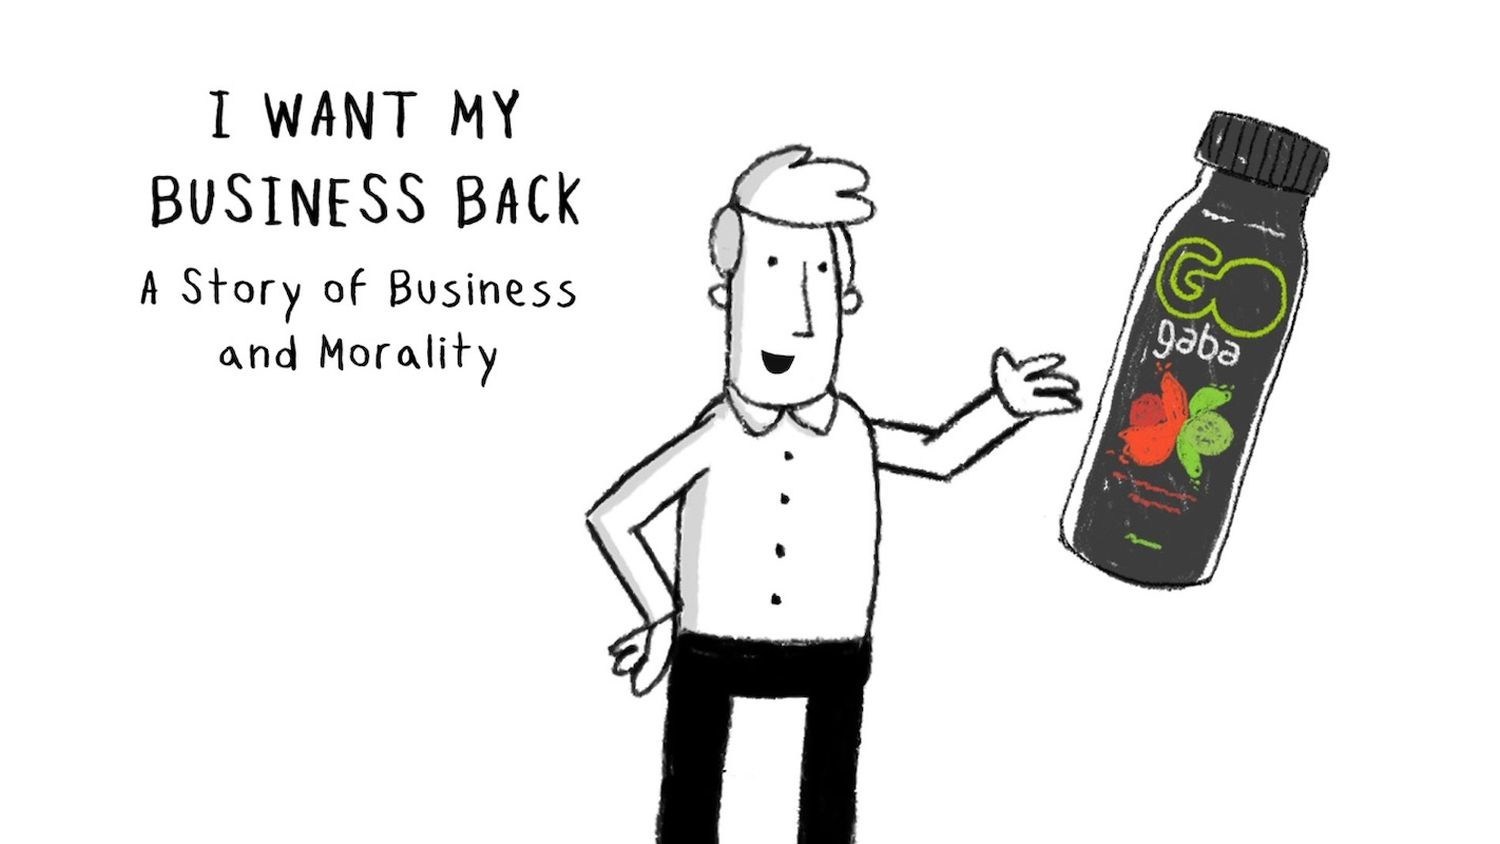 Go Gaba Founder Launches Campaign Iwantmybusinessback Com To Raise Awareness For Entrepreneurs